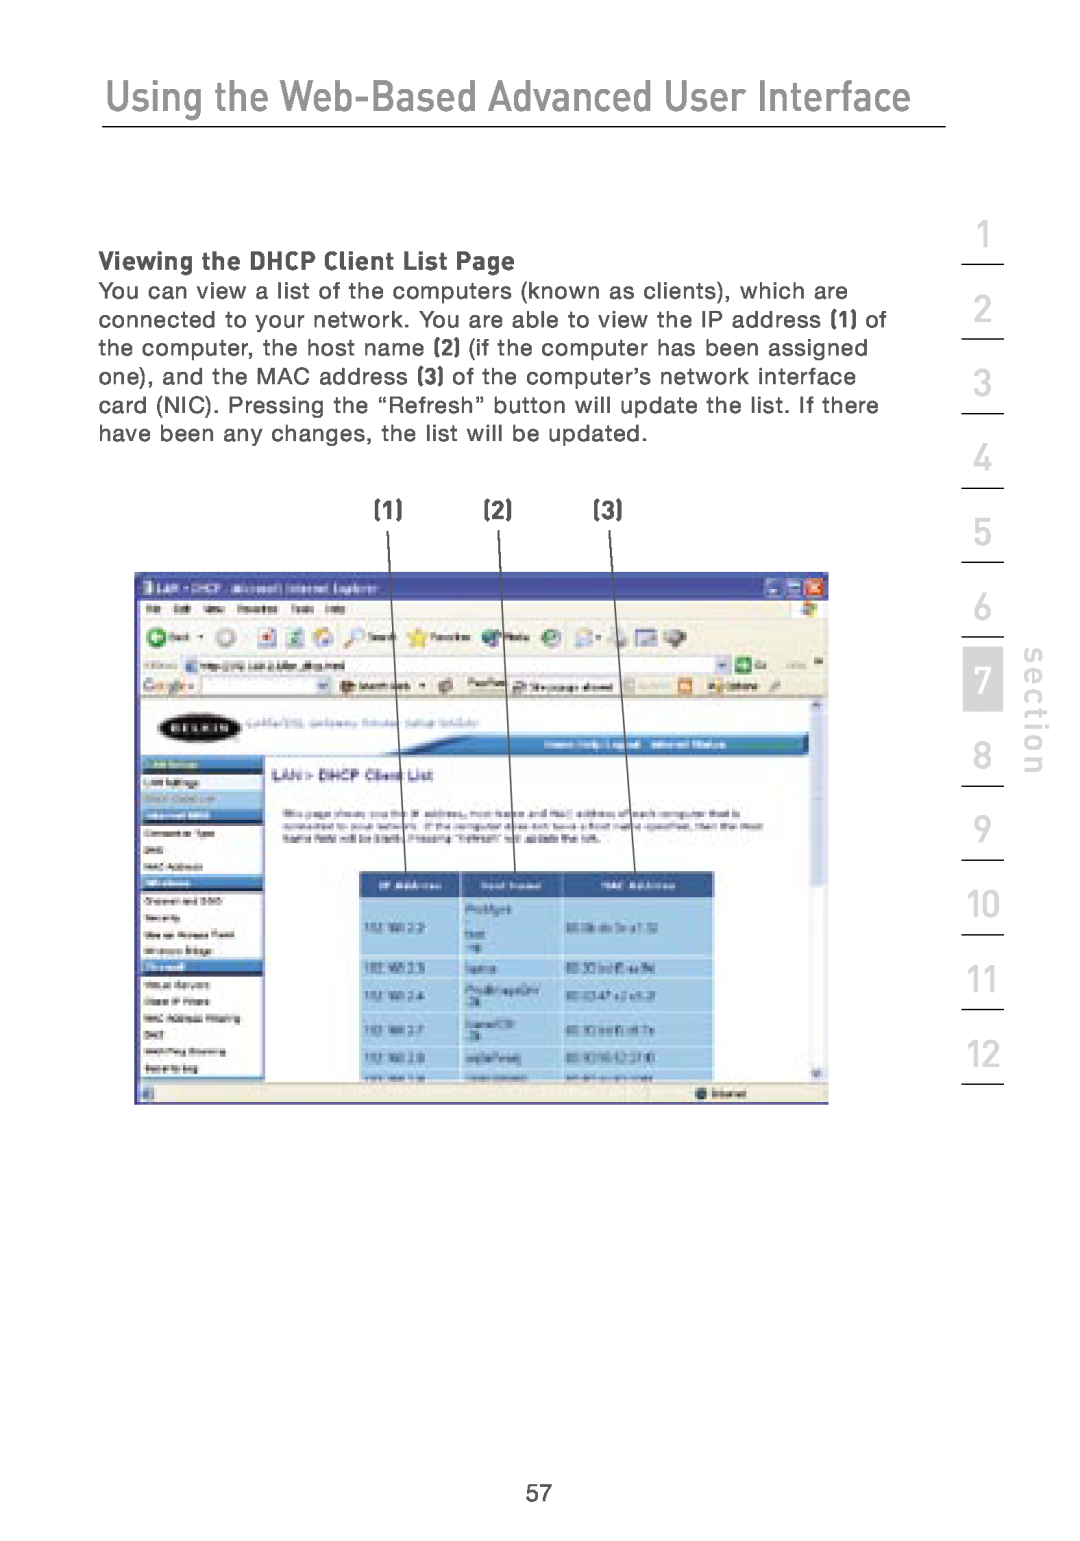 Belkin F5D7230AU4P user manual Using the Web-Based Advanced User Interface, Viewing the DHCP Client List Page, section 